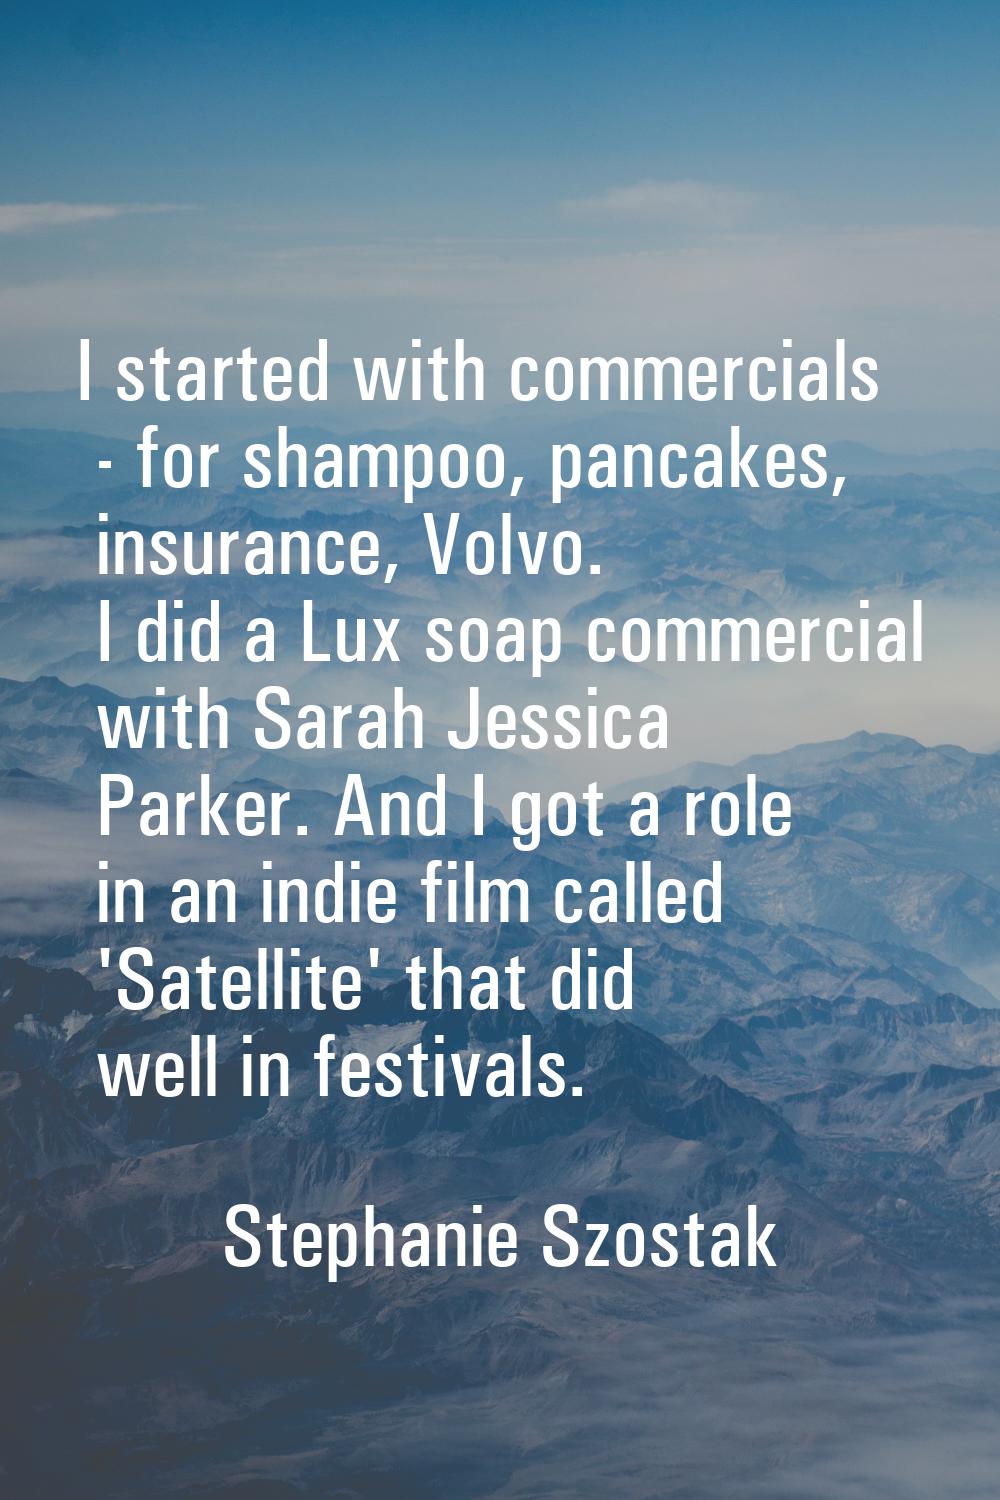 I started with commercials - for shampoo, pancakes, insurance, Volvo. I did a Lux soap commercial w